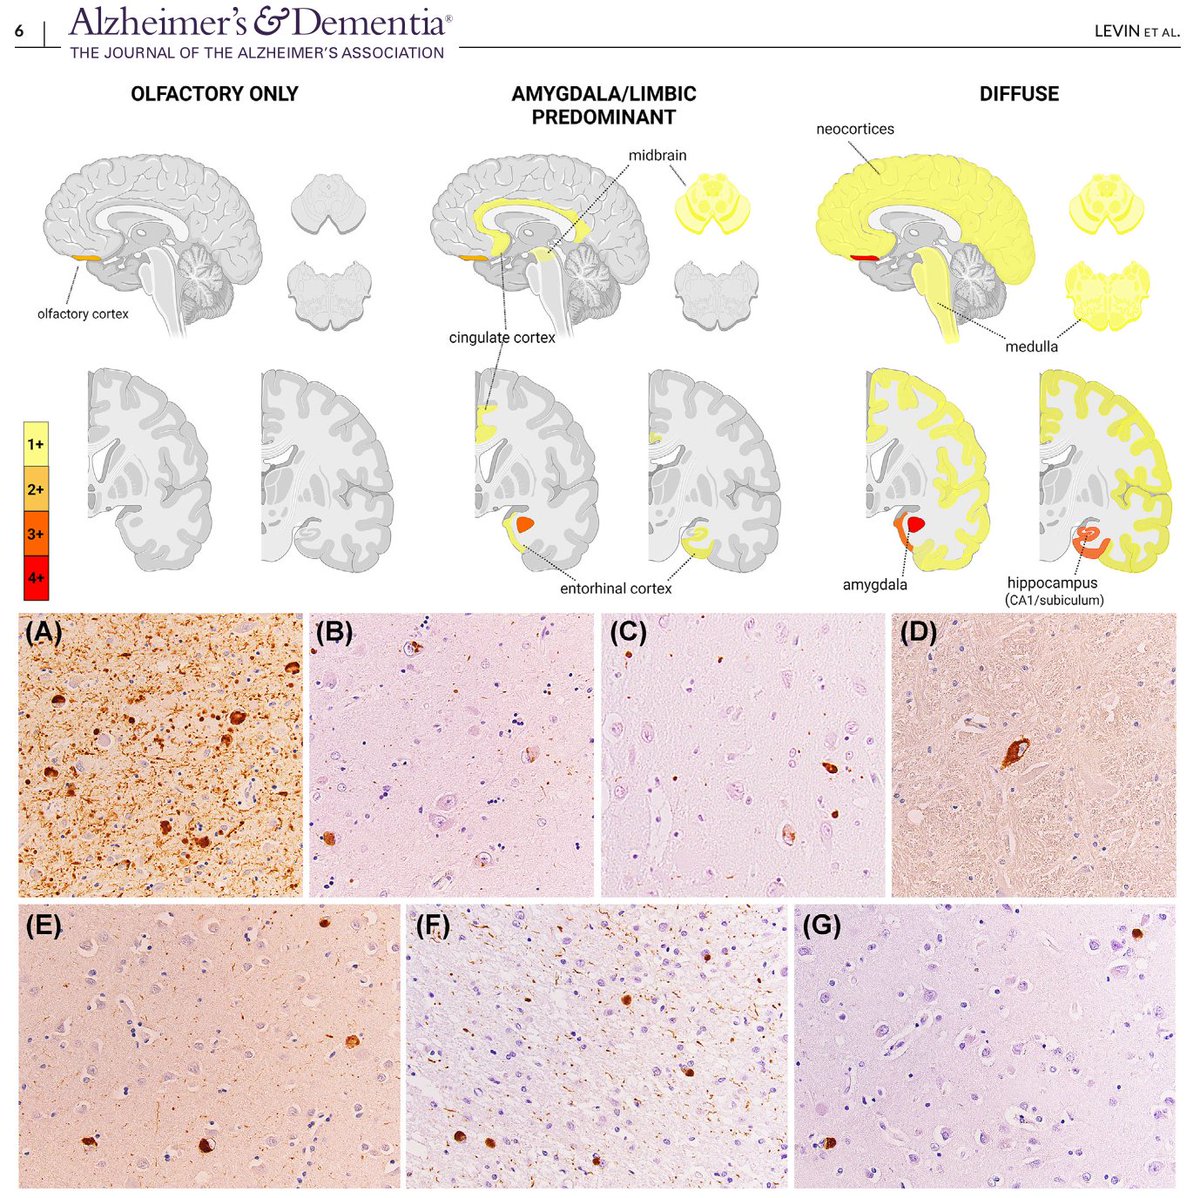 Lewy body pathology is found in ~50% of both sporadic and familial Alzheimer's disease. Levin et al. showed that: 1. 0/26 of asymptomatic and 3/27 (11%) of symptomatic AD mutation carriers tested positive on an α-synuclein seed amplification assay (SAA) in cerebrospinal fluid.…